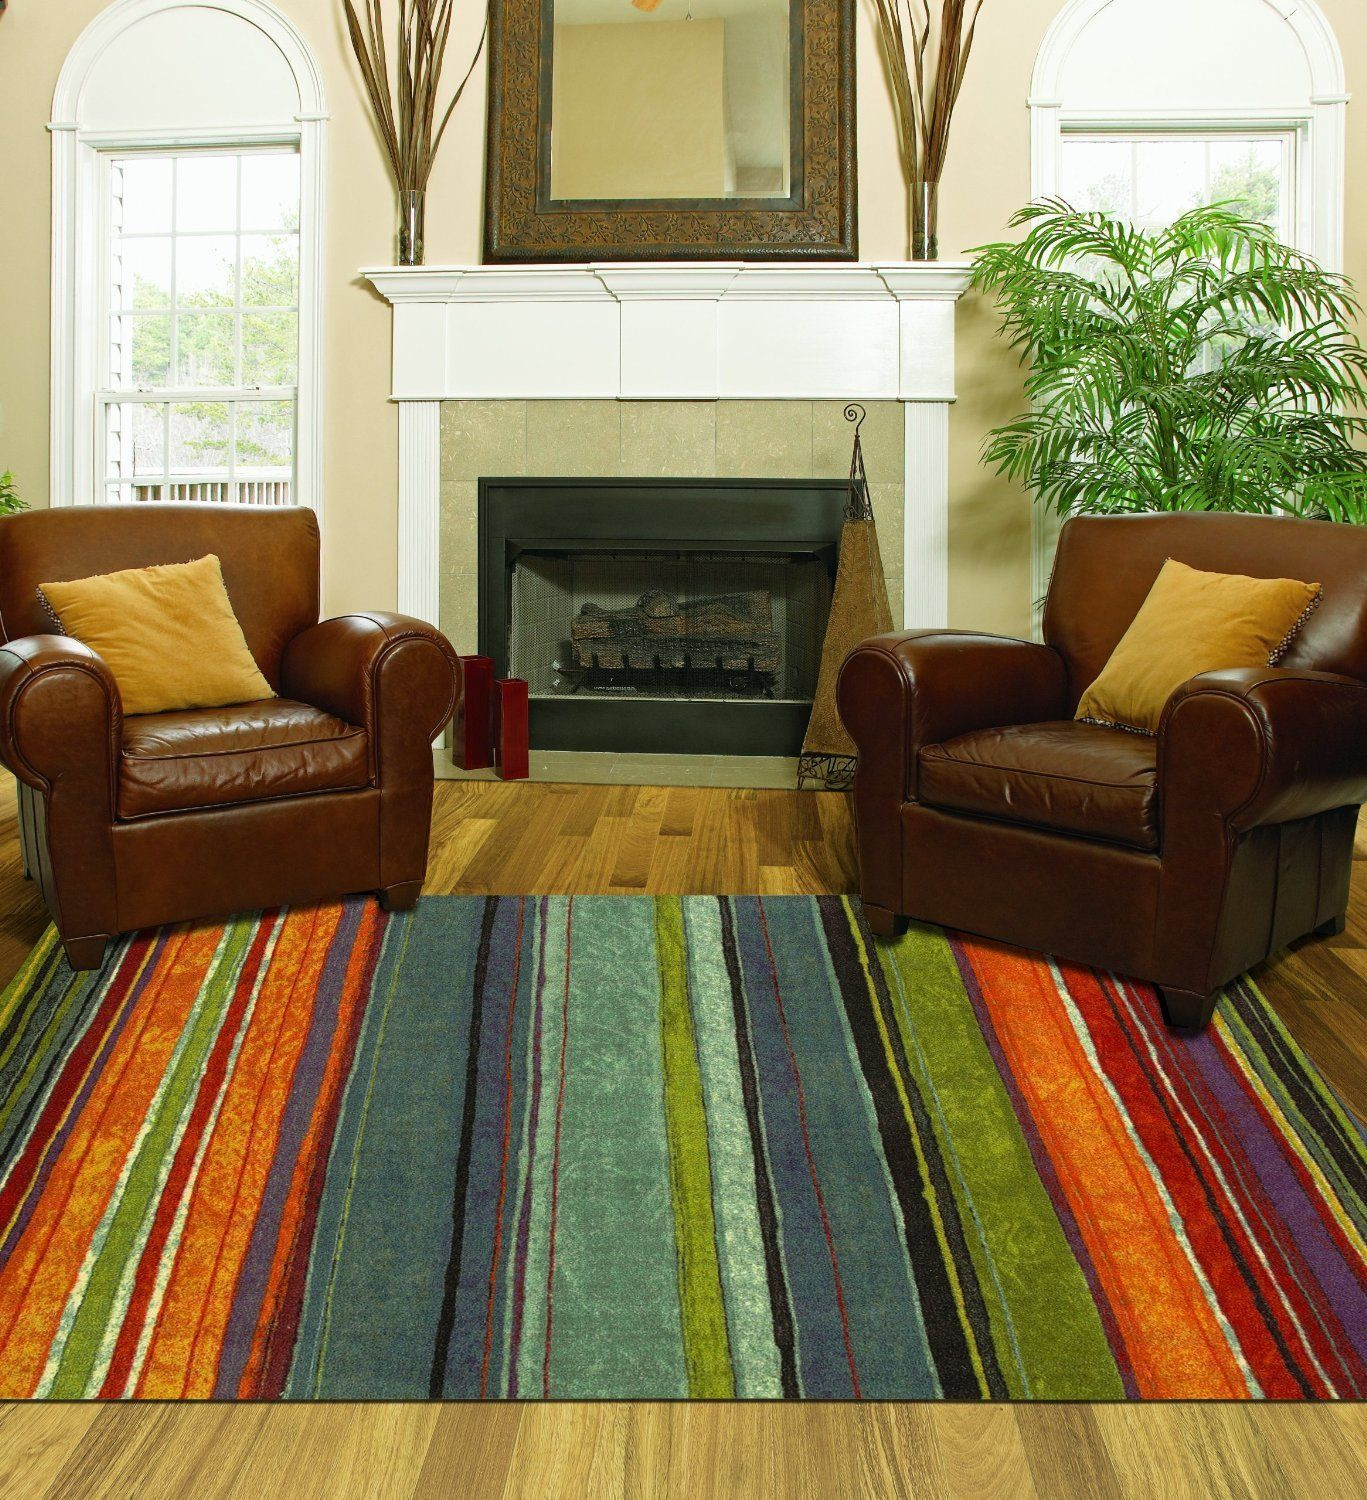 Rug Size For Living Room
 Area Rug Colorful 8x10 Living Room Size Carpet Home